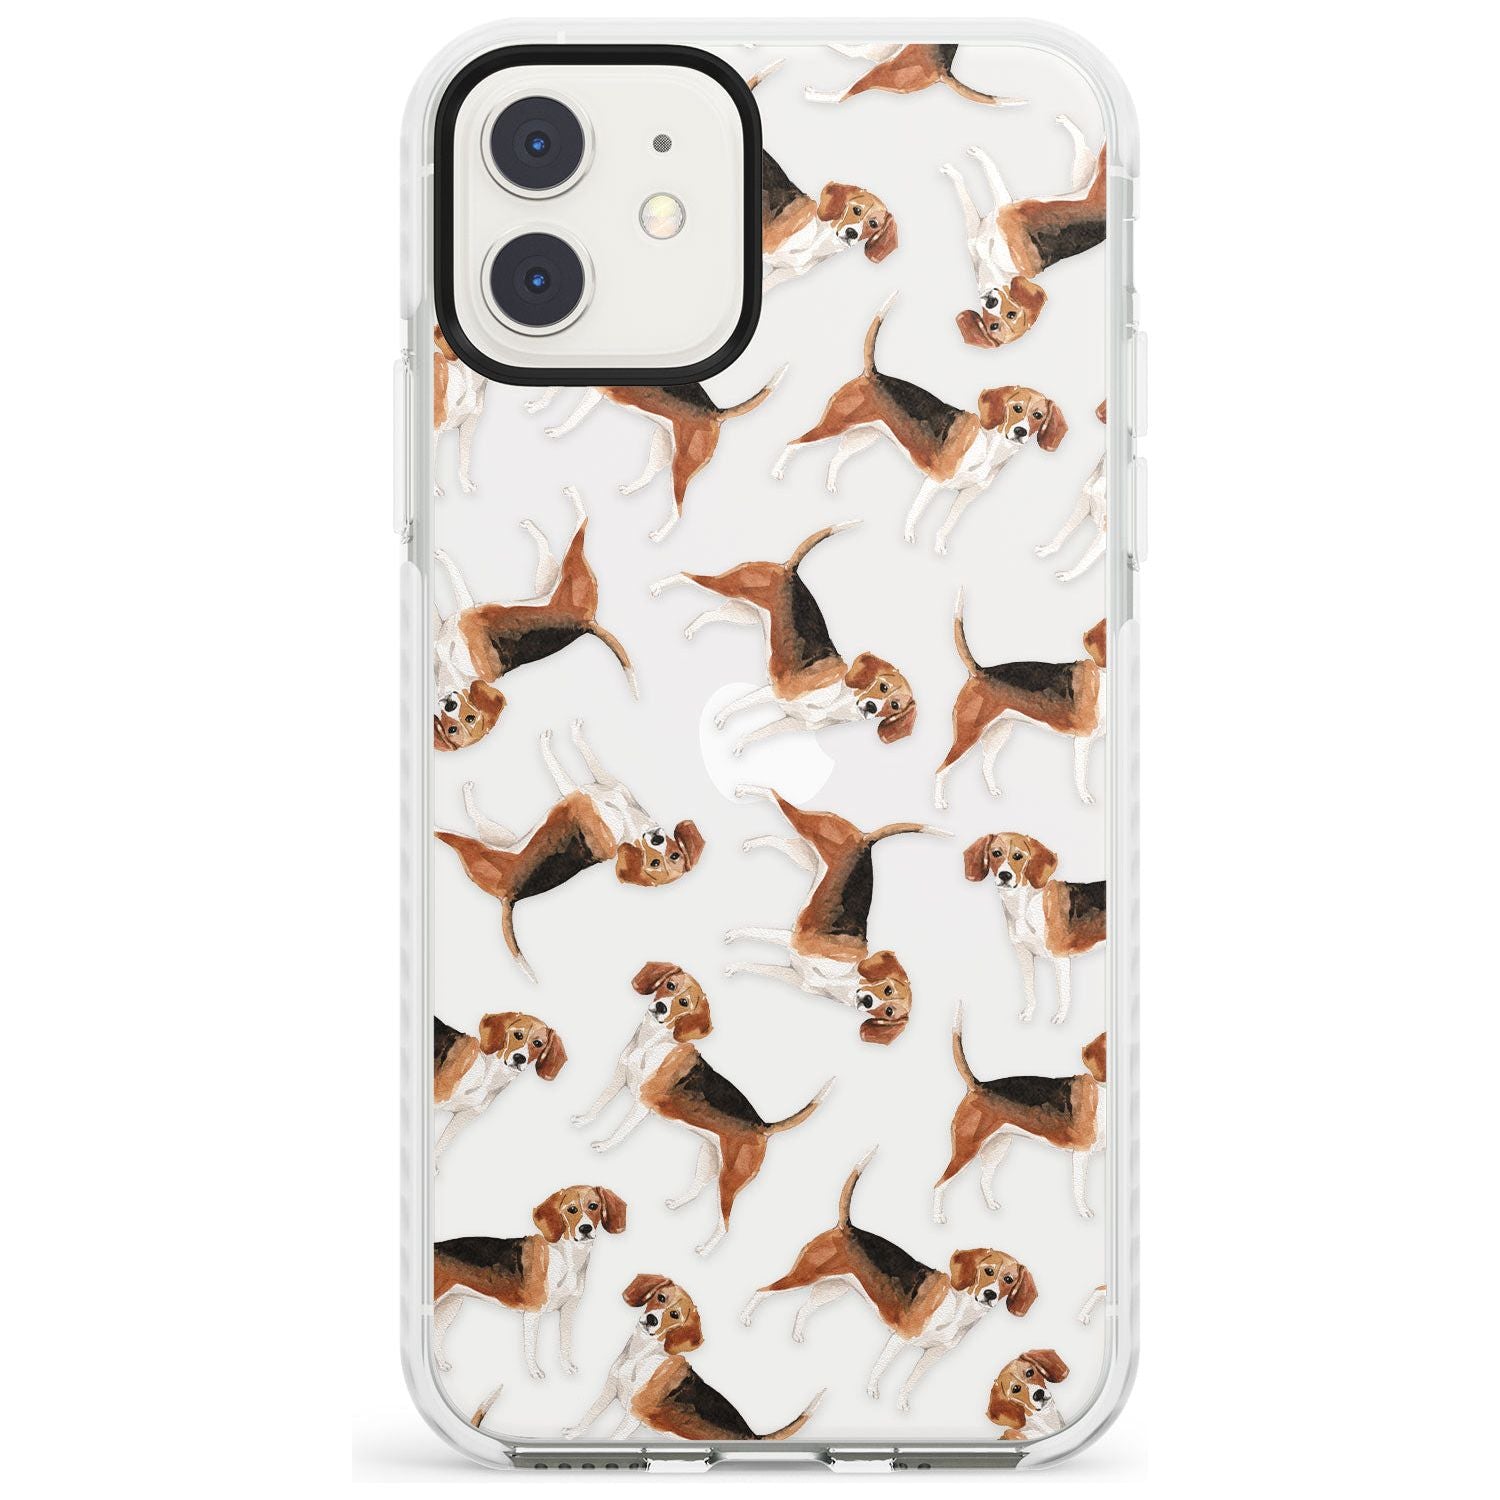 Beagle Watercolour Dog Pattern Impact Phone Case for iPhone 11